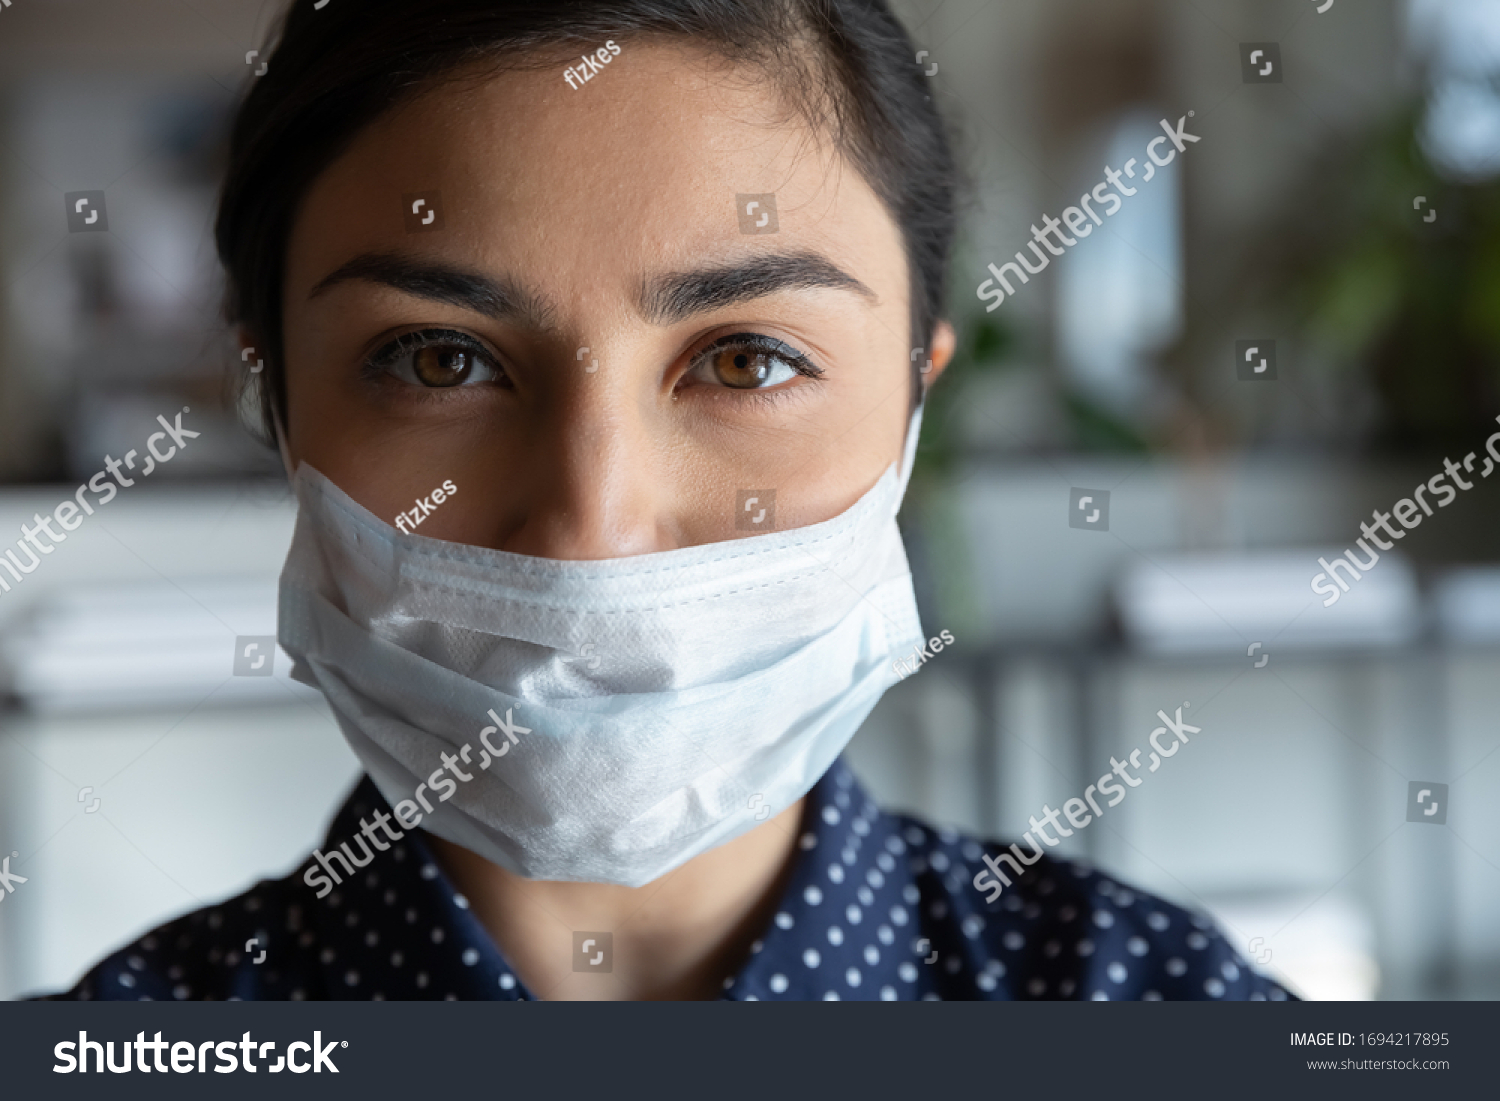 Close up head shot portrait young serious cautious indian ethnic woman employee worker wearing protective medical mask, looking at camera, keeping corporate quarantine rules, healthcare concept. #1694217895